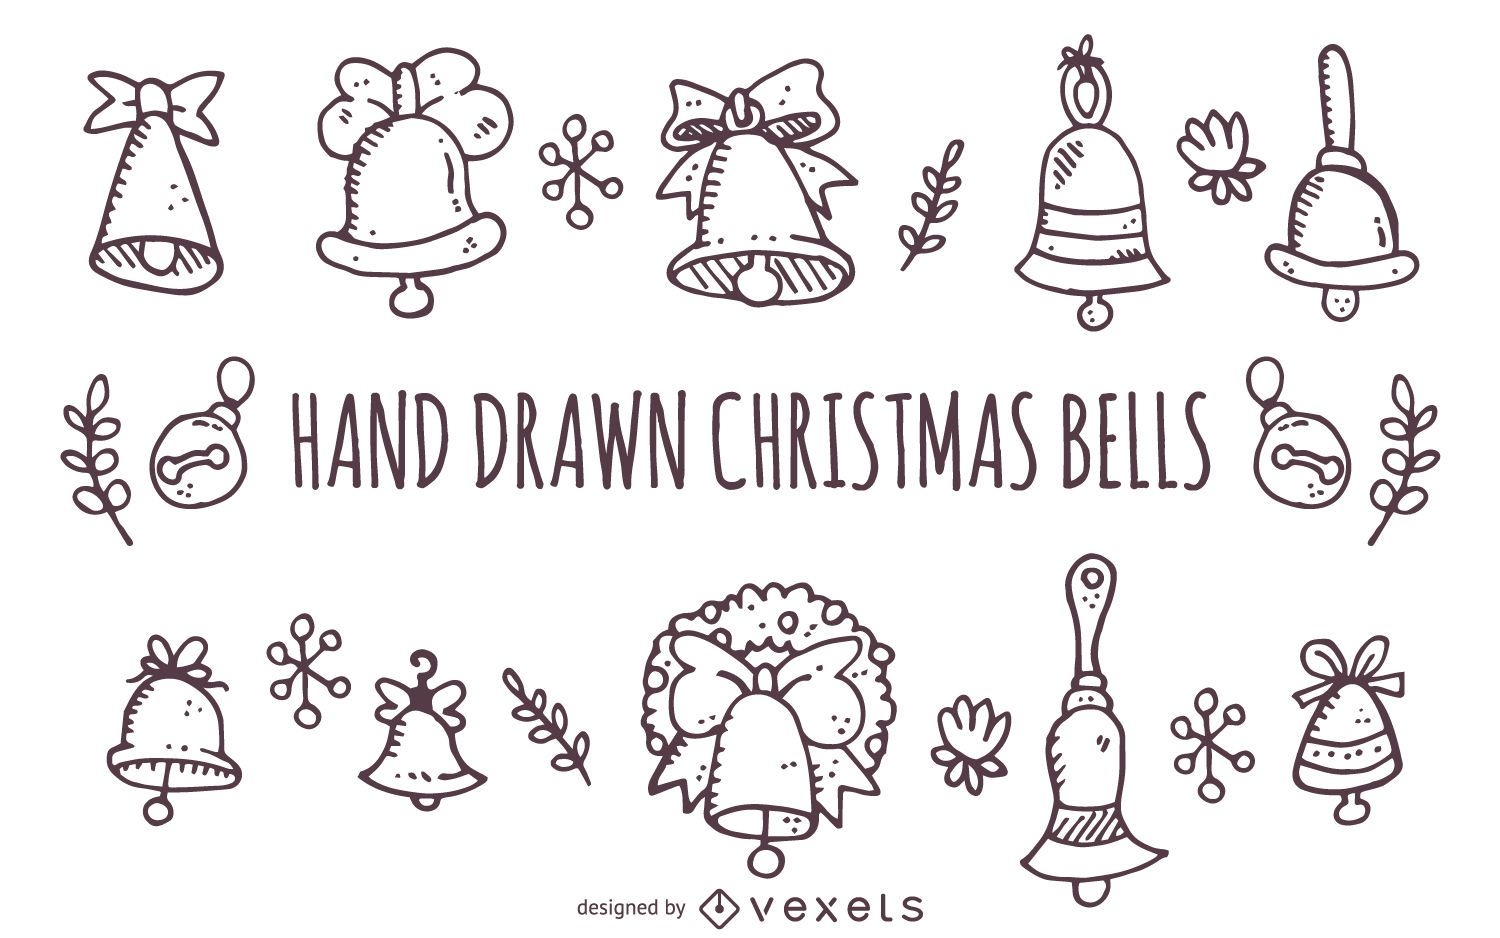 Hand drawn Christmas bells outlines